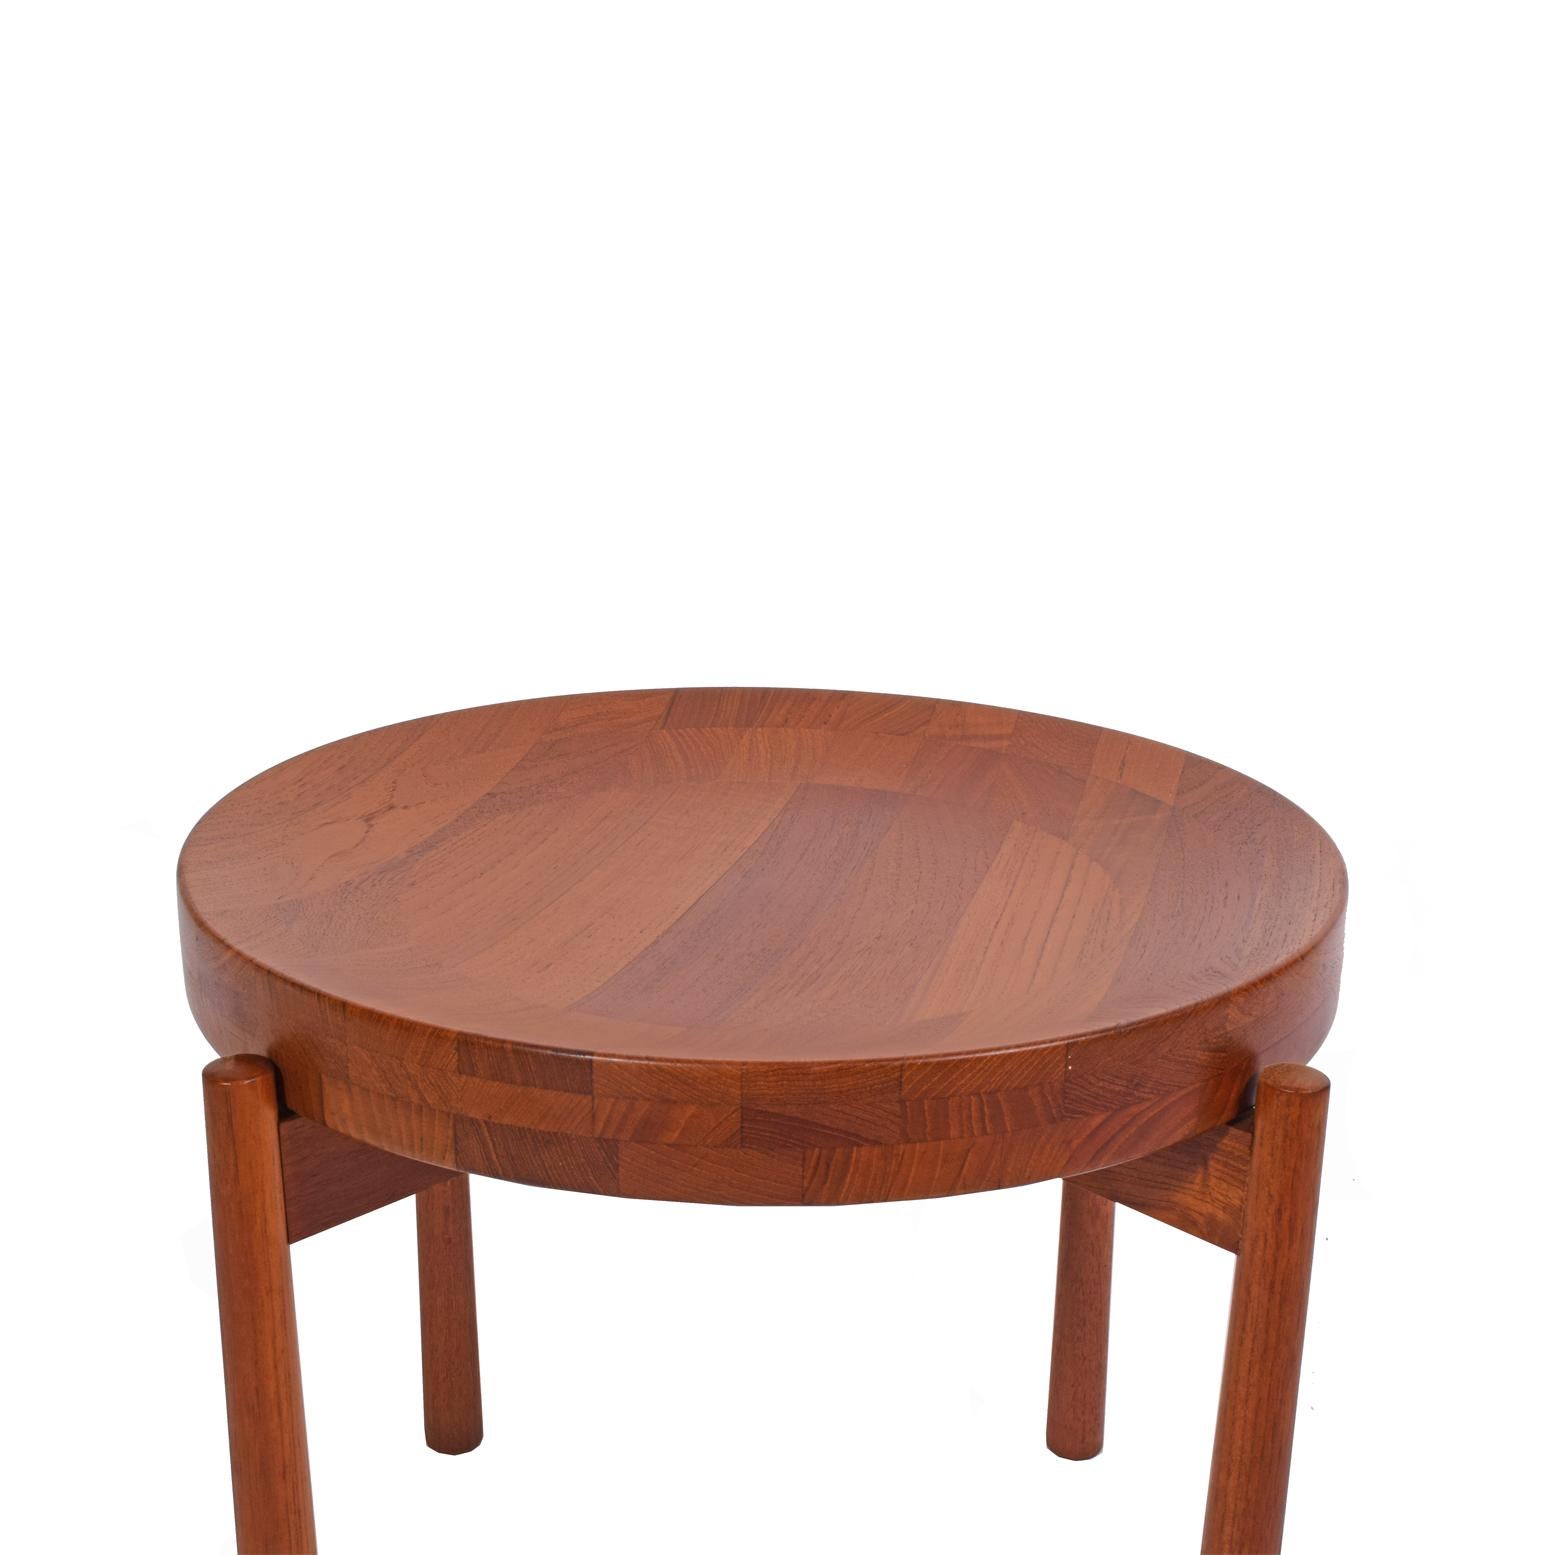 Solid teak side table with revers top and four legs.